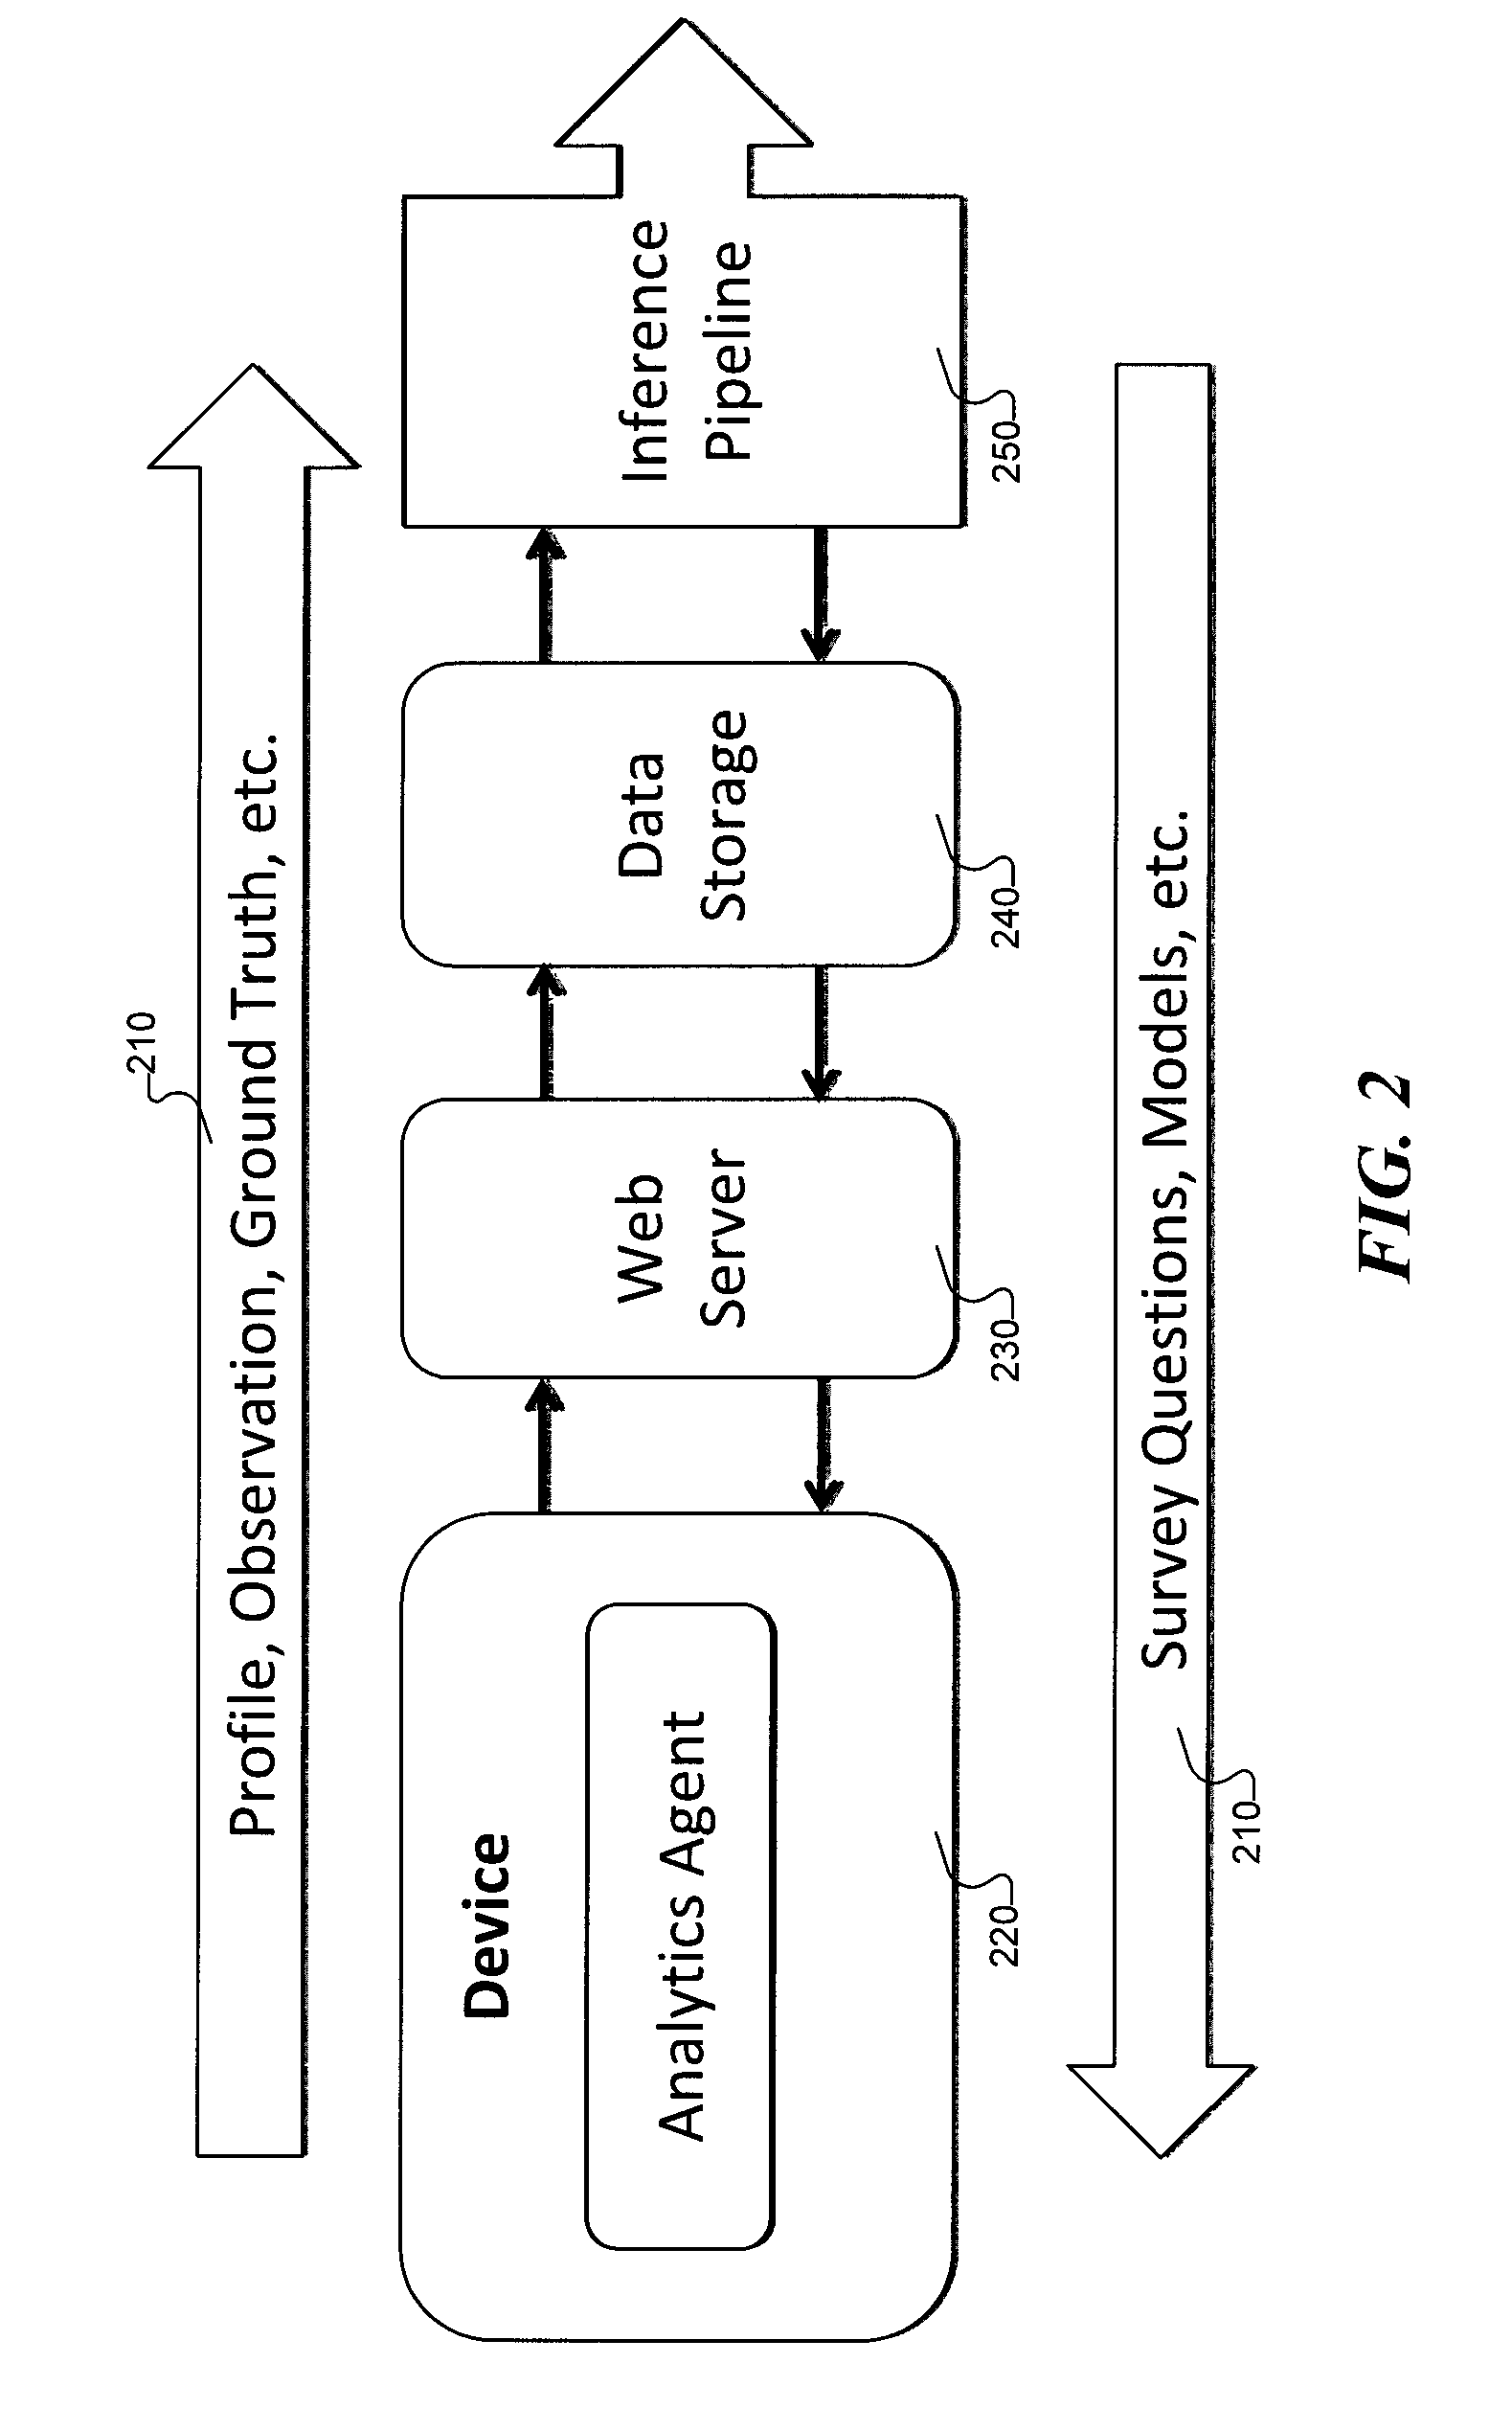 System and method for data collection to validate location data